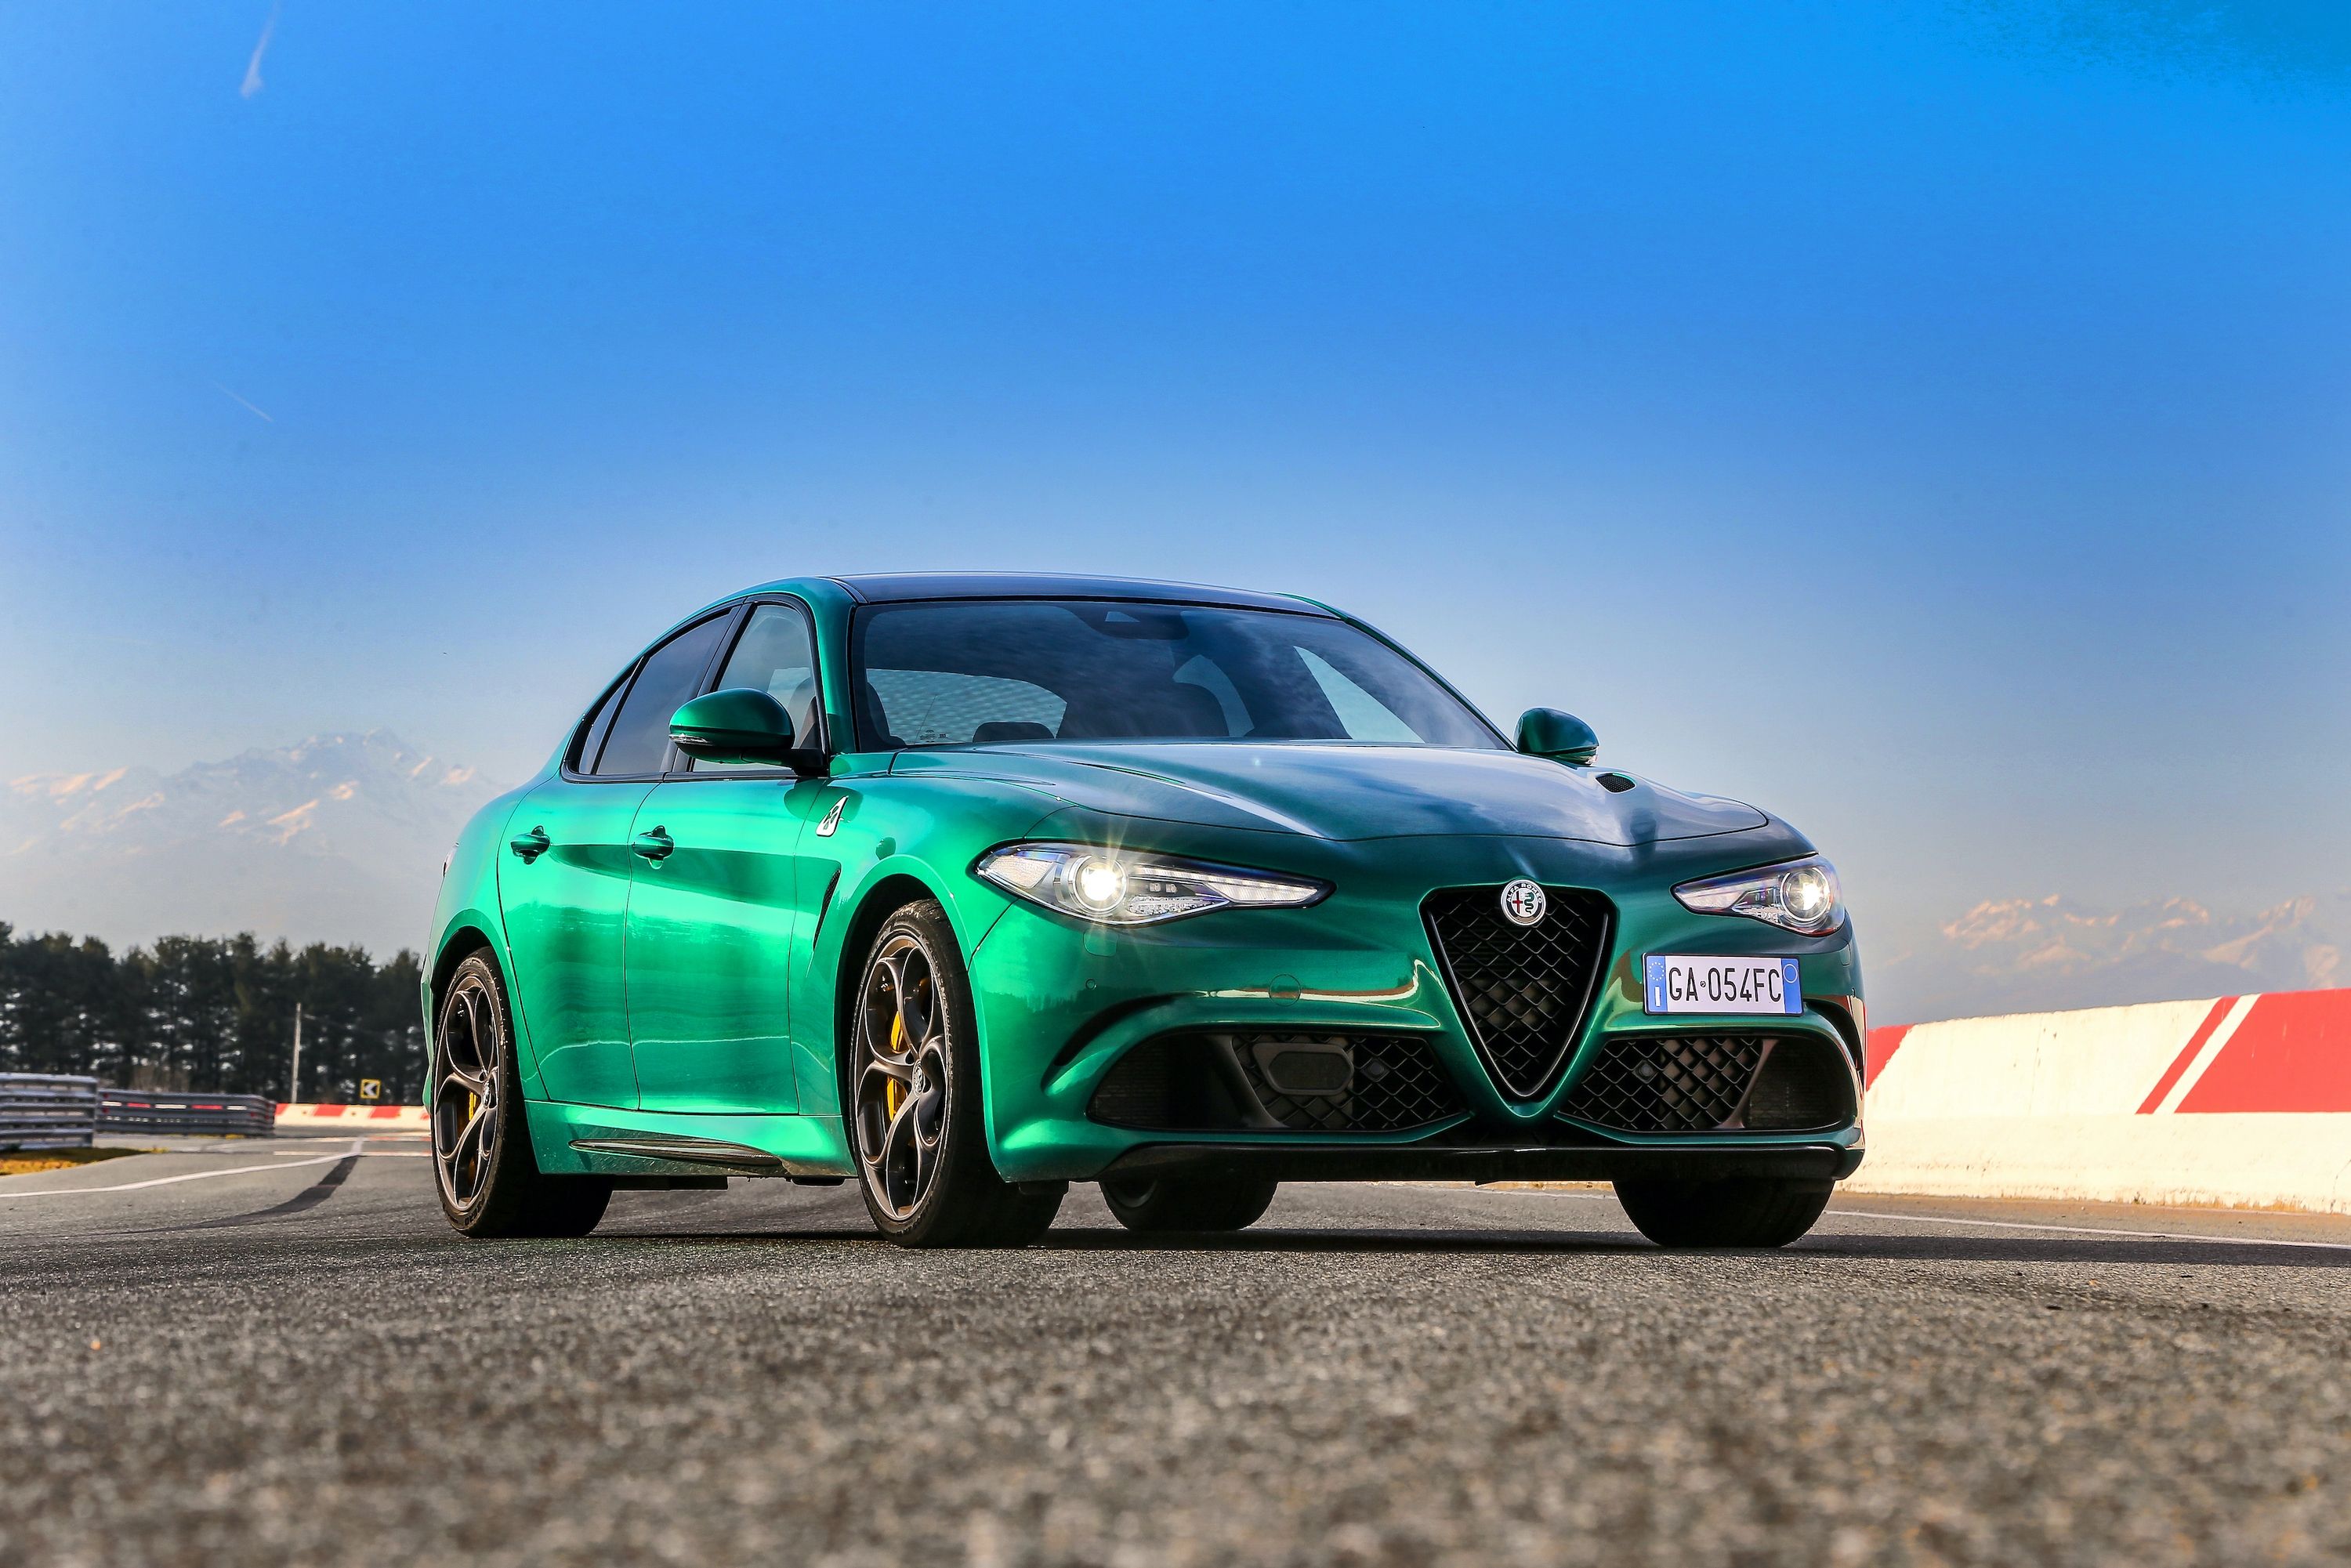 2021 Alfa Romeo Giulia Review, Pricing, & Pictures